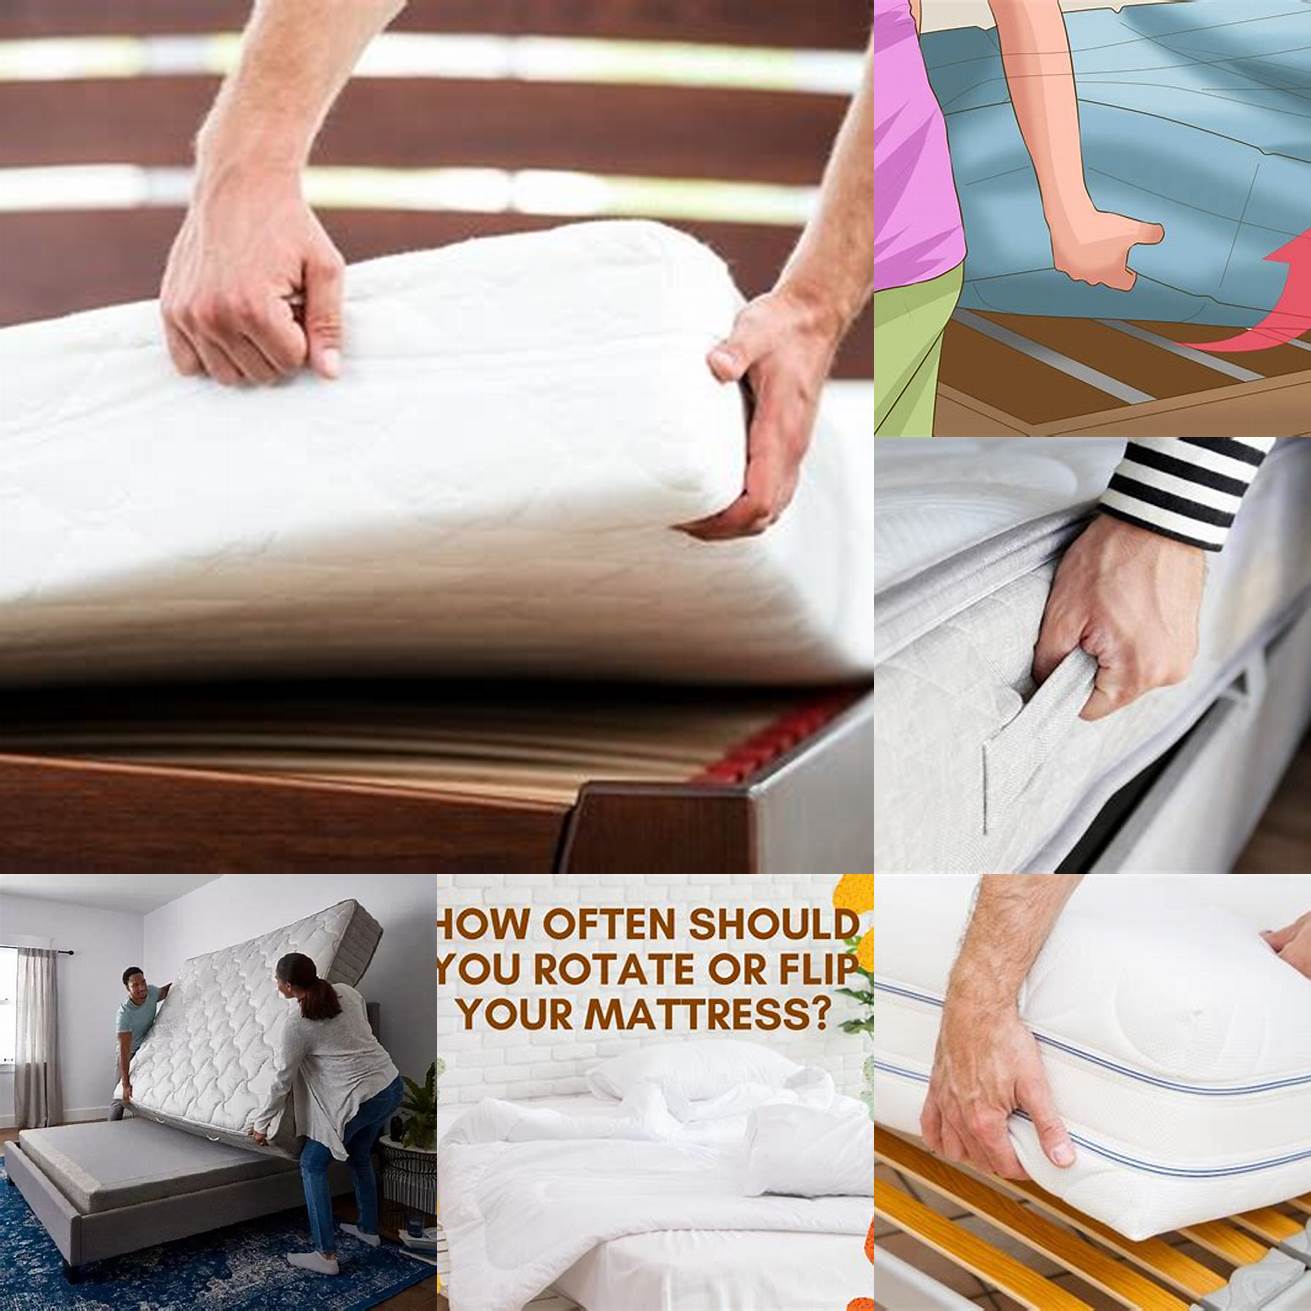 Rotate your mattress regularly to prevent wear and tear on one side